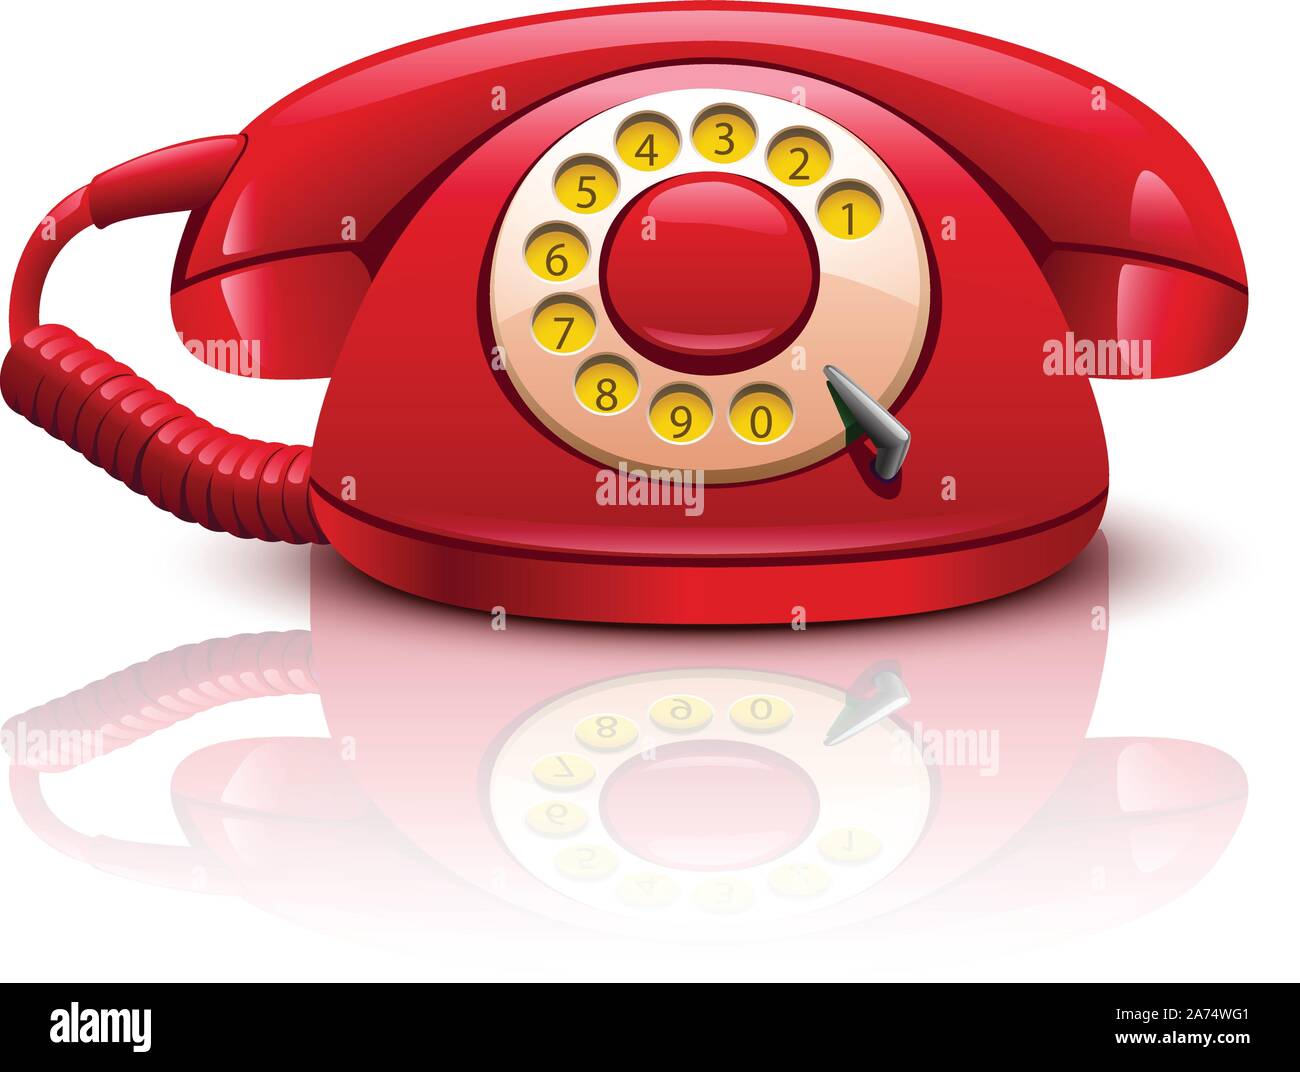 red phone 01 Stock Vector